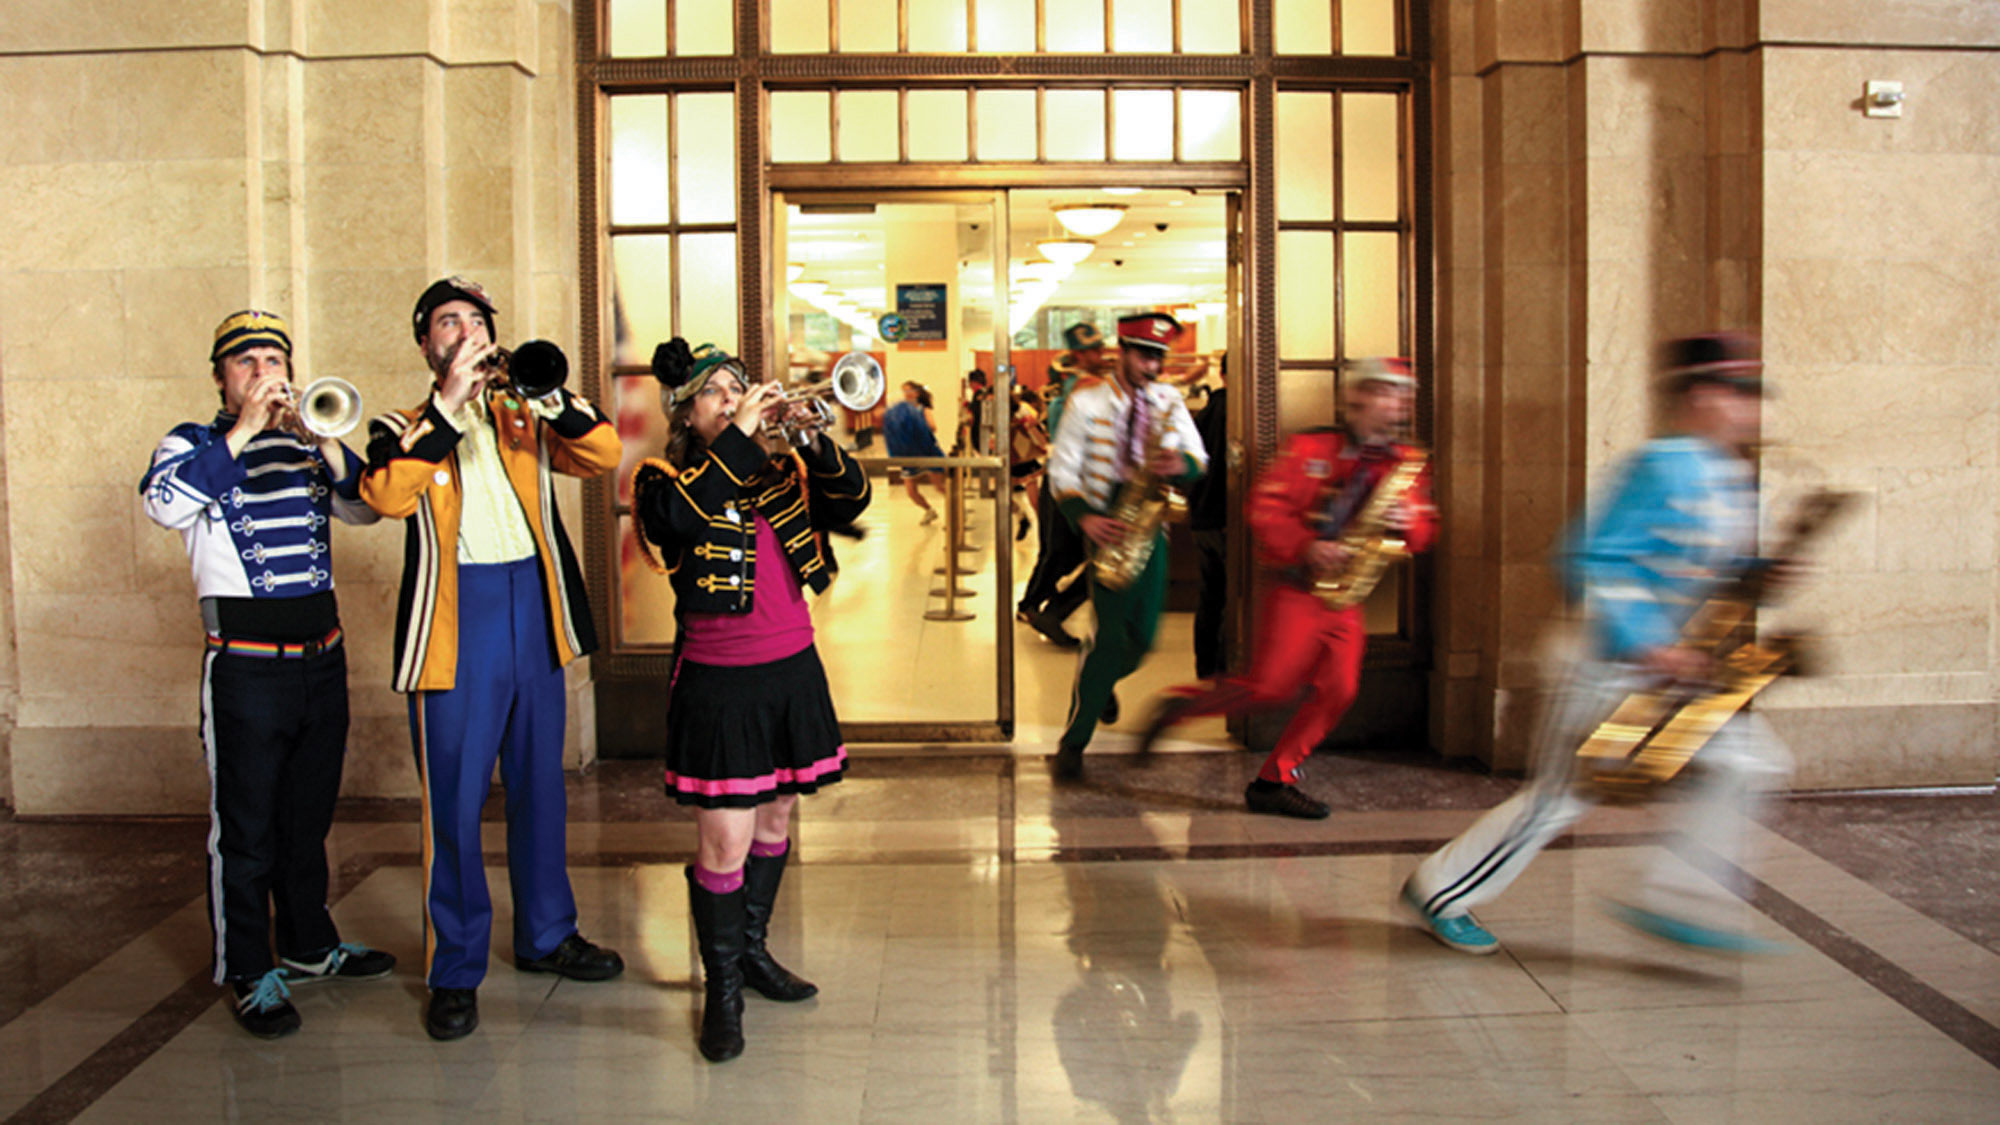 A marching band wearing traditional marching band costumes in various colors running out the door of an office or government building. 